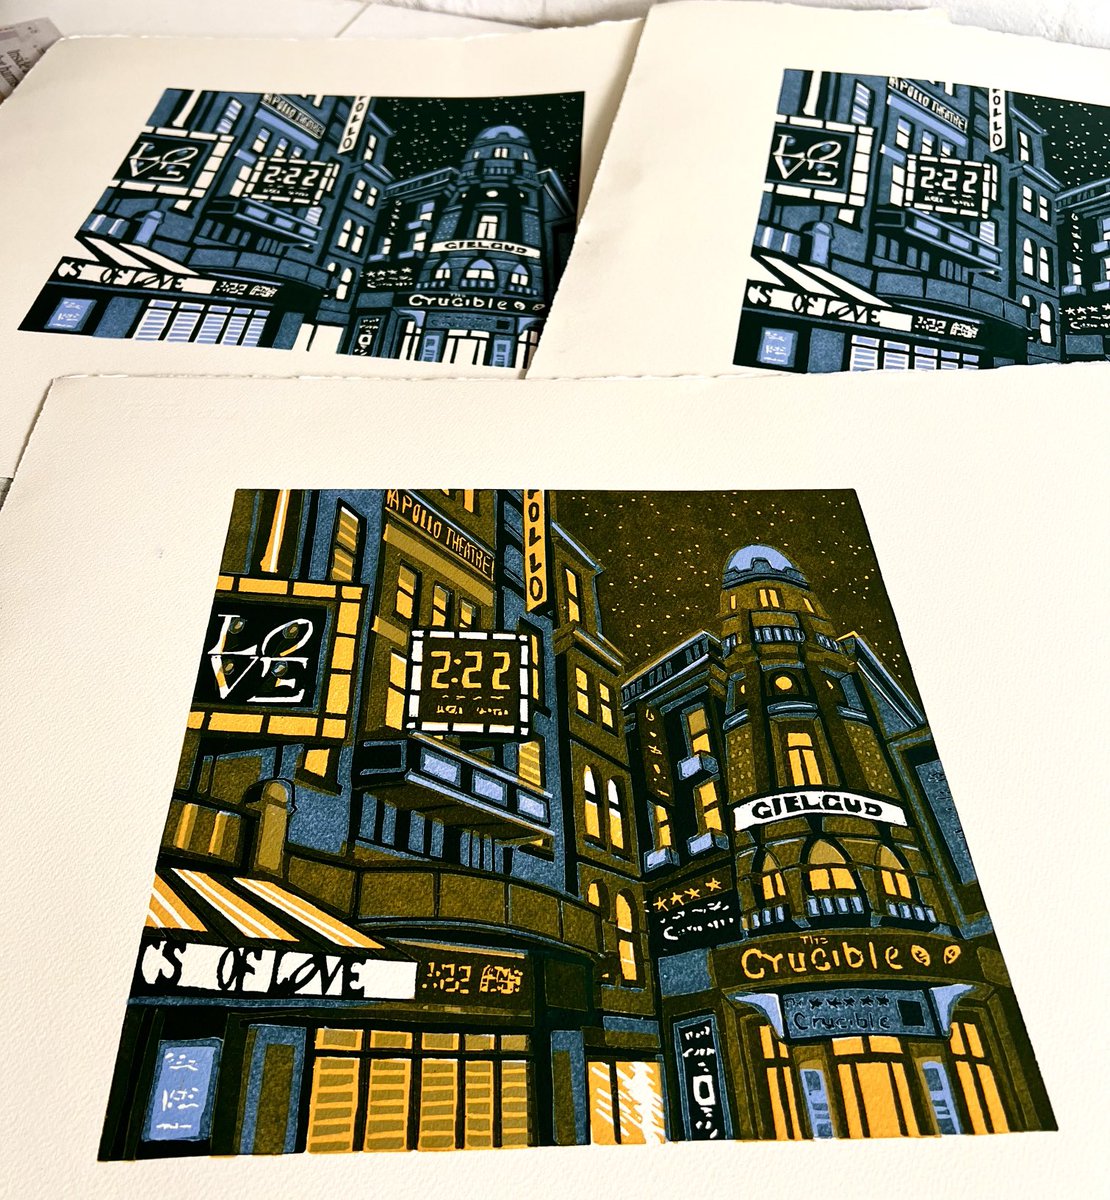 Amazing what a layer of yellow ink can do to a linocut! 💛
#shaftesburyavenue